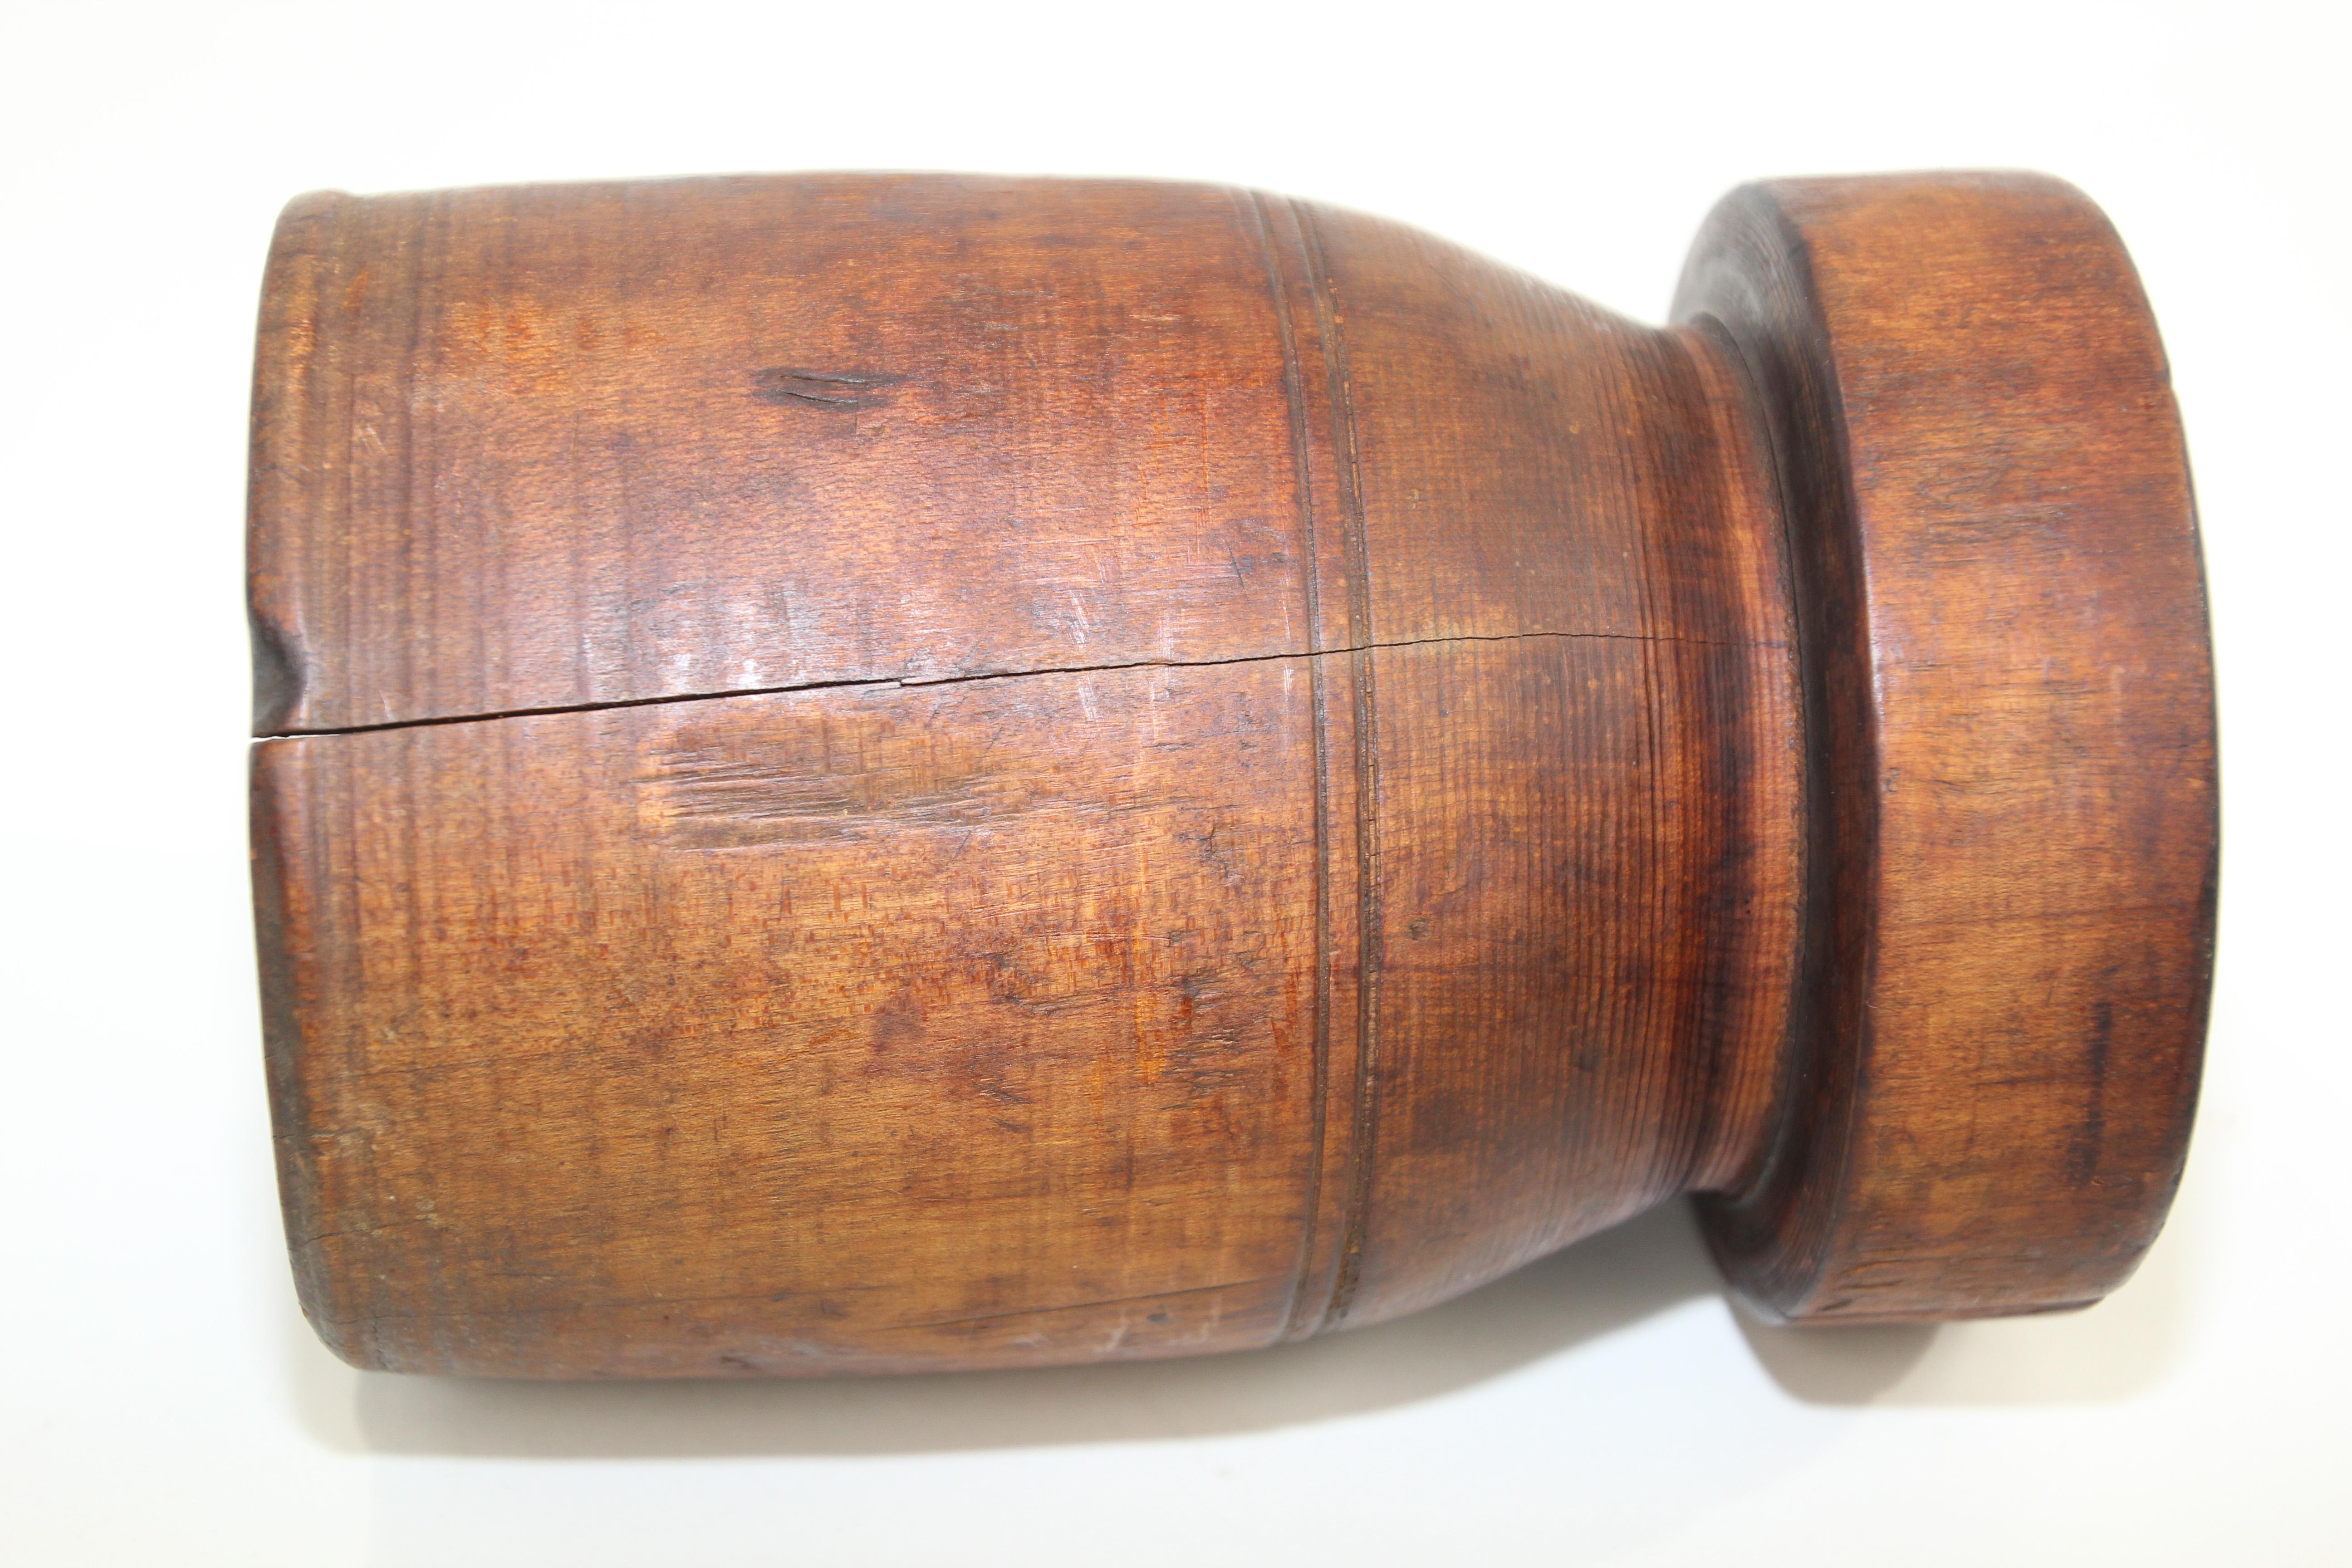 Large Antique Wooden American Mortar and Pestle In Good Condition For Sale In North Hollywood, CA